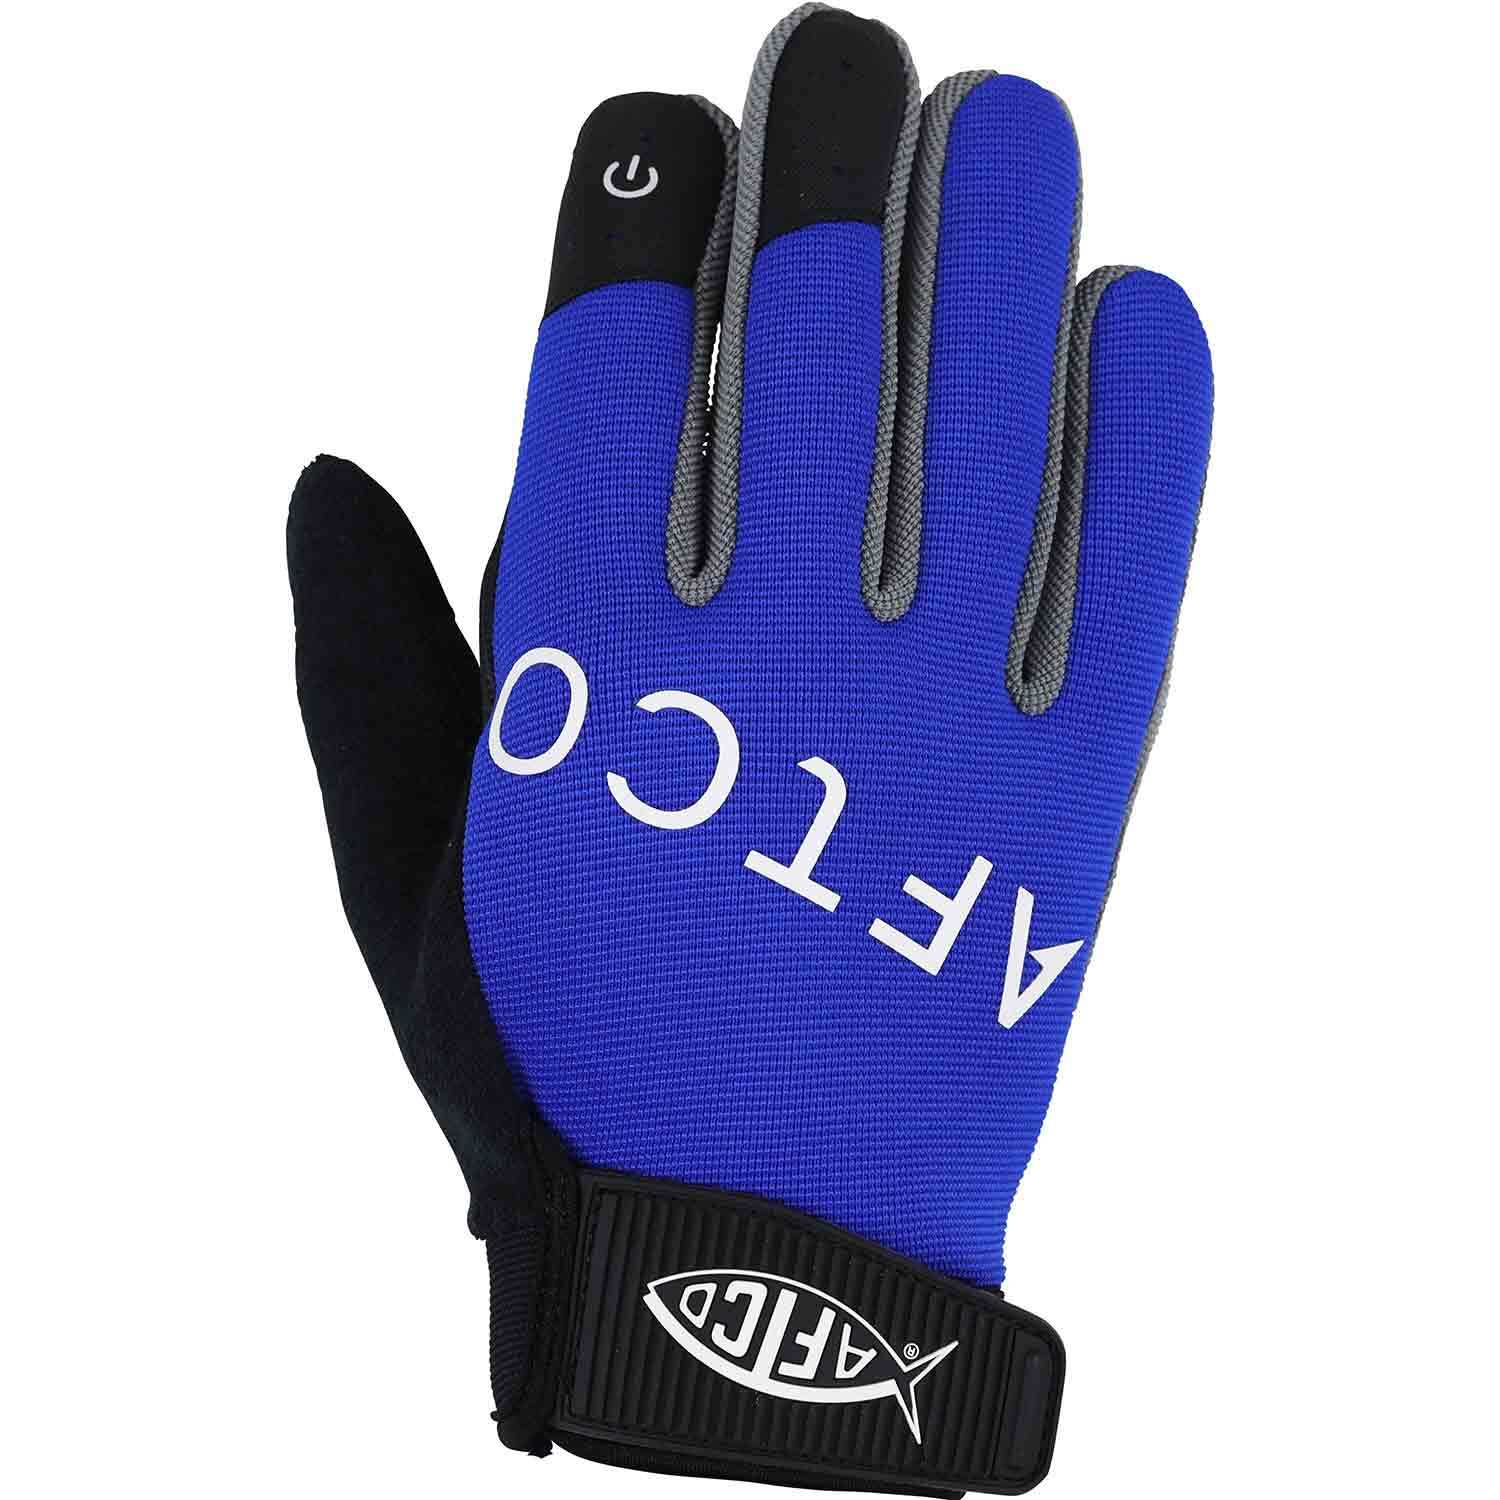 GLOVEU2-BLU-XL Details about   Utility Fishing Gloves by Aftco Size: XL Free Shipping 